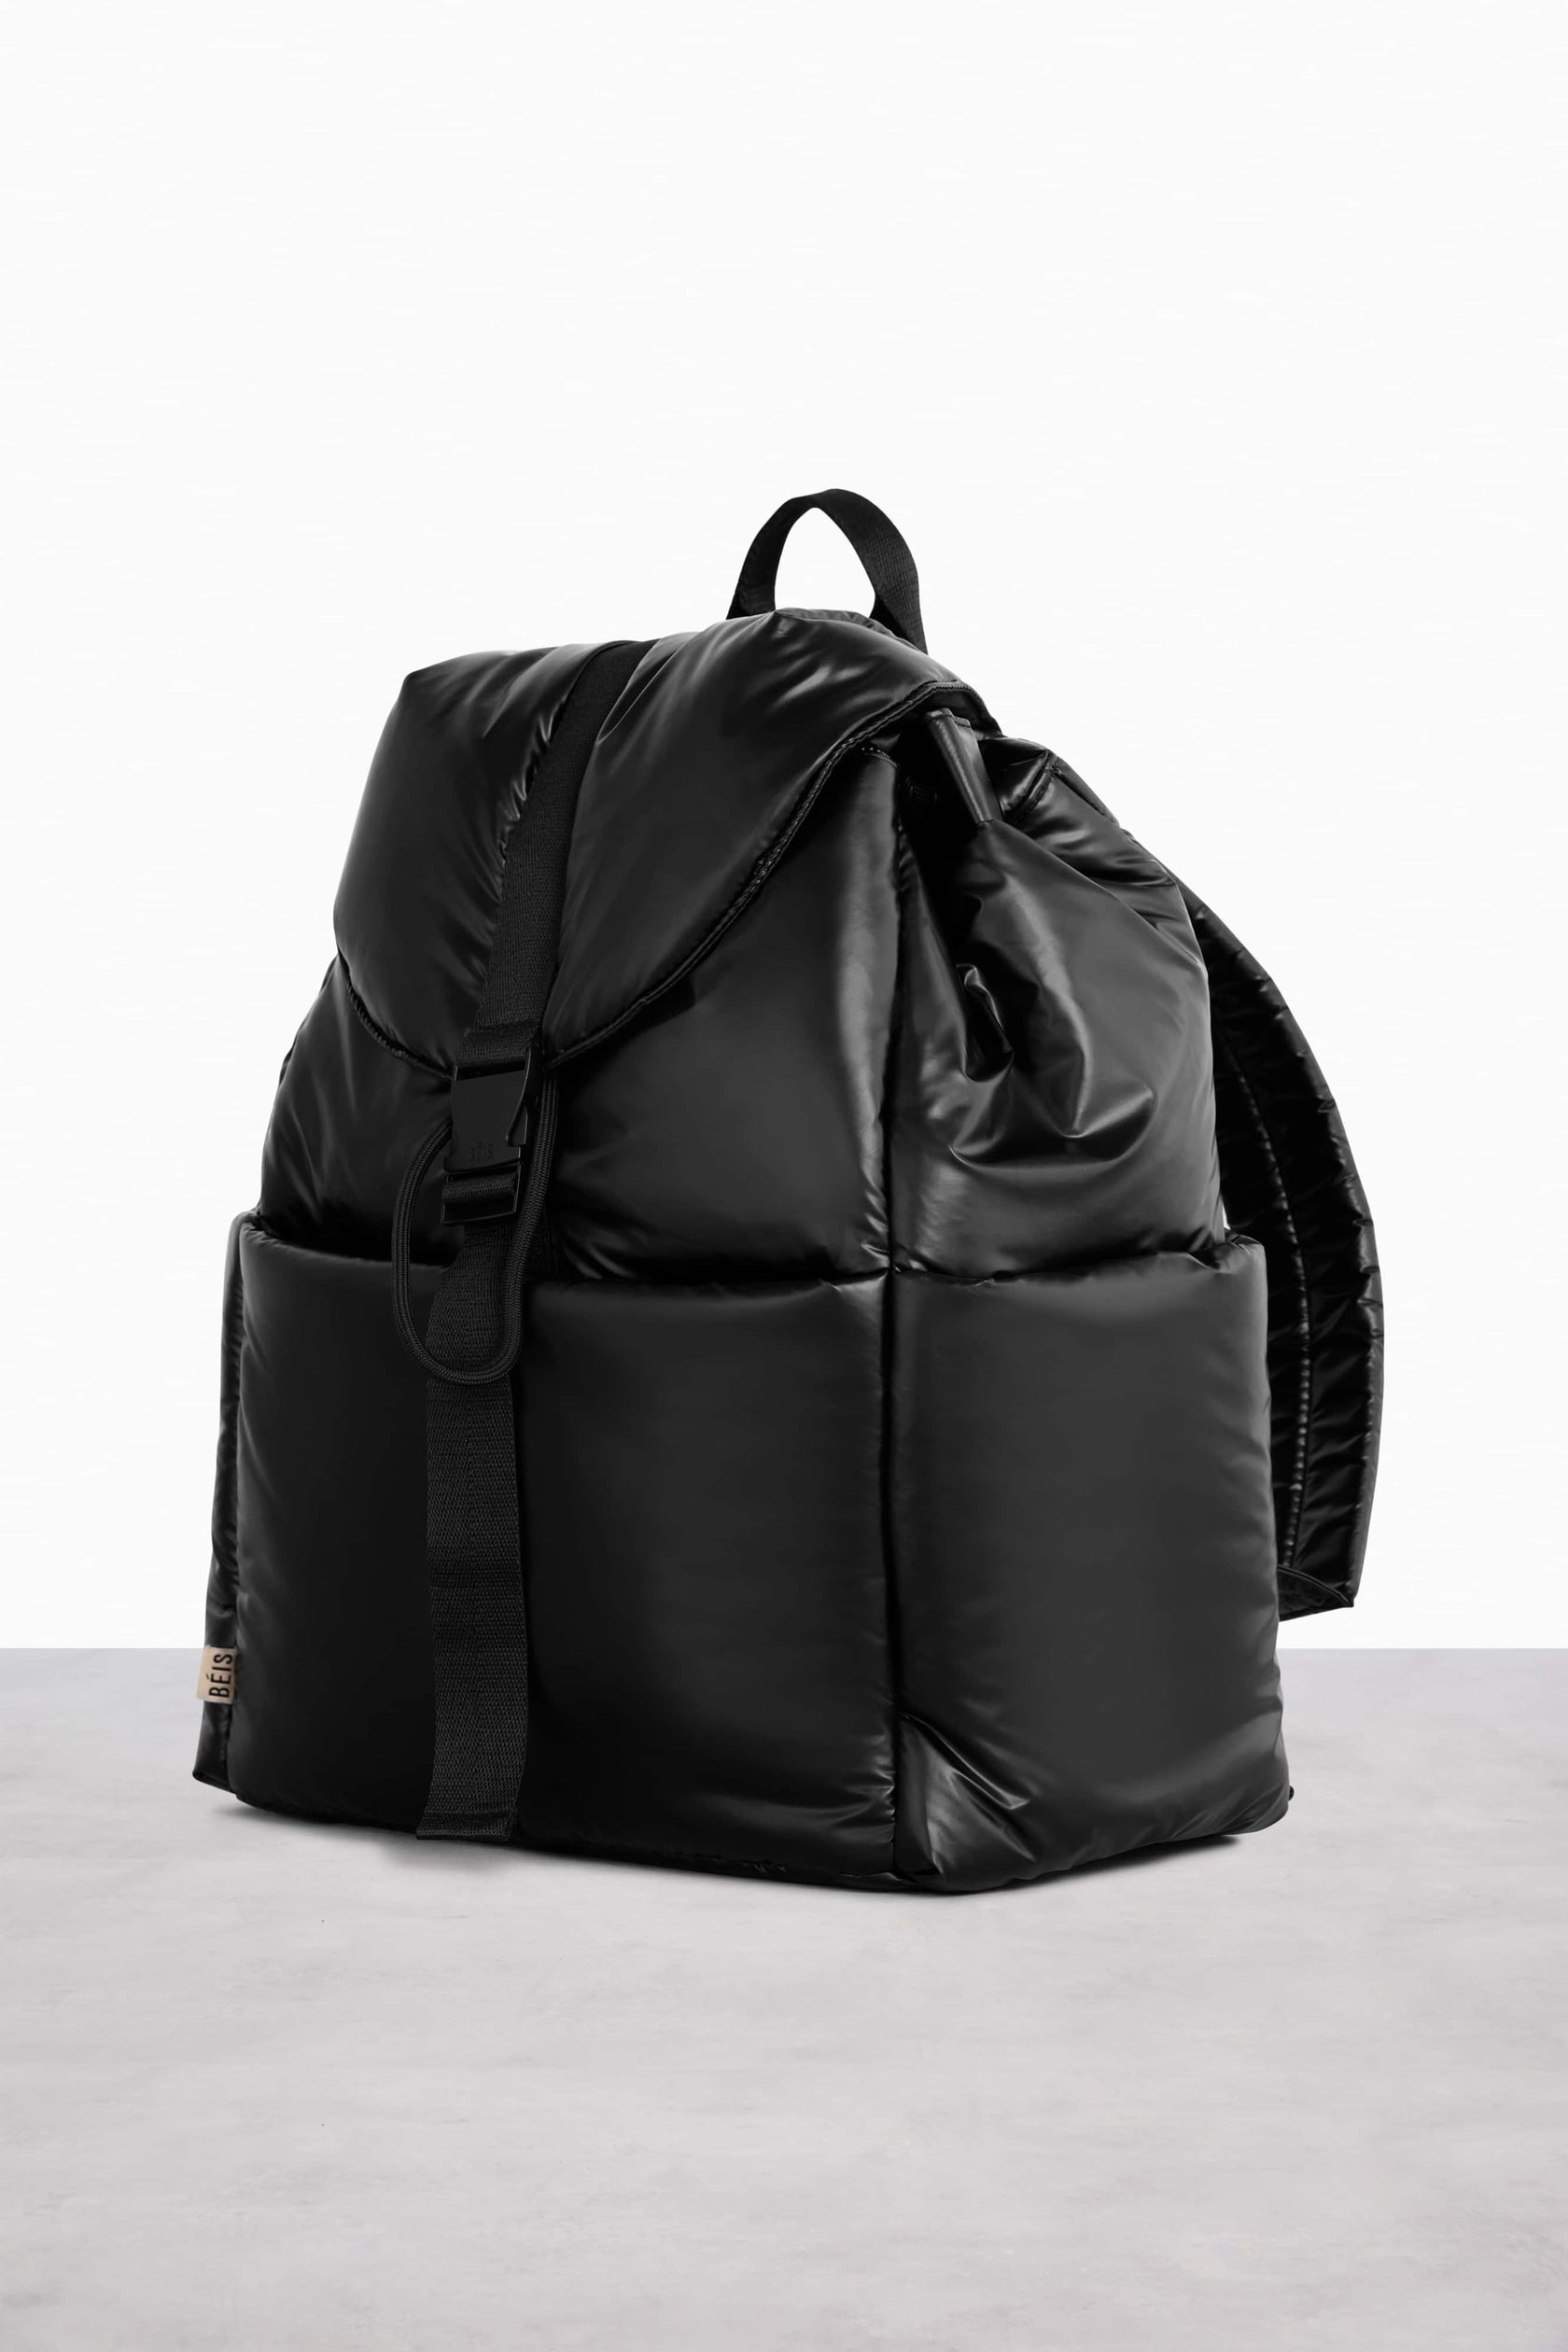 BÉIS 'The Cargo Backpack' in Black - Cargo Airplane Backpack For Travel